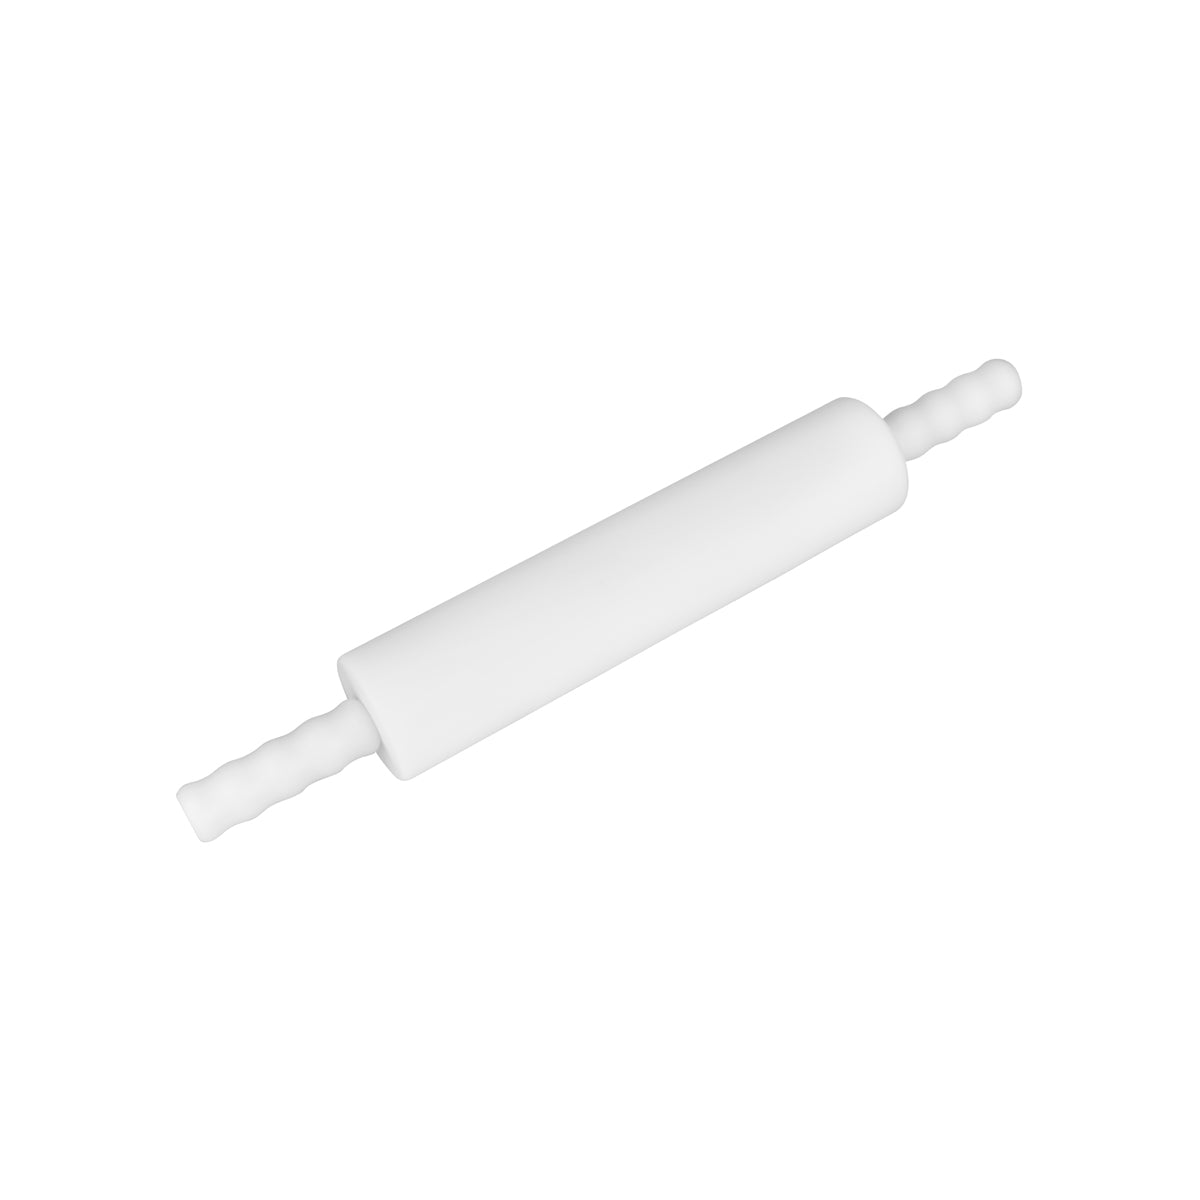 31142 Thermohauser Rolling Pin Plastic 350mm Tomkin Australia Hospitality Supplies